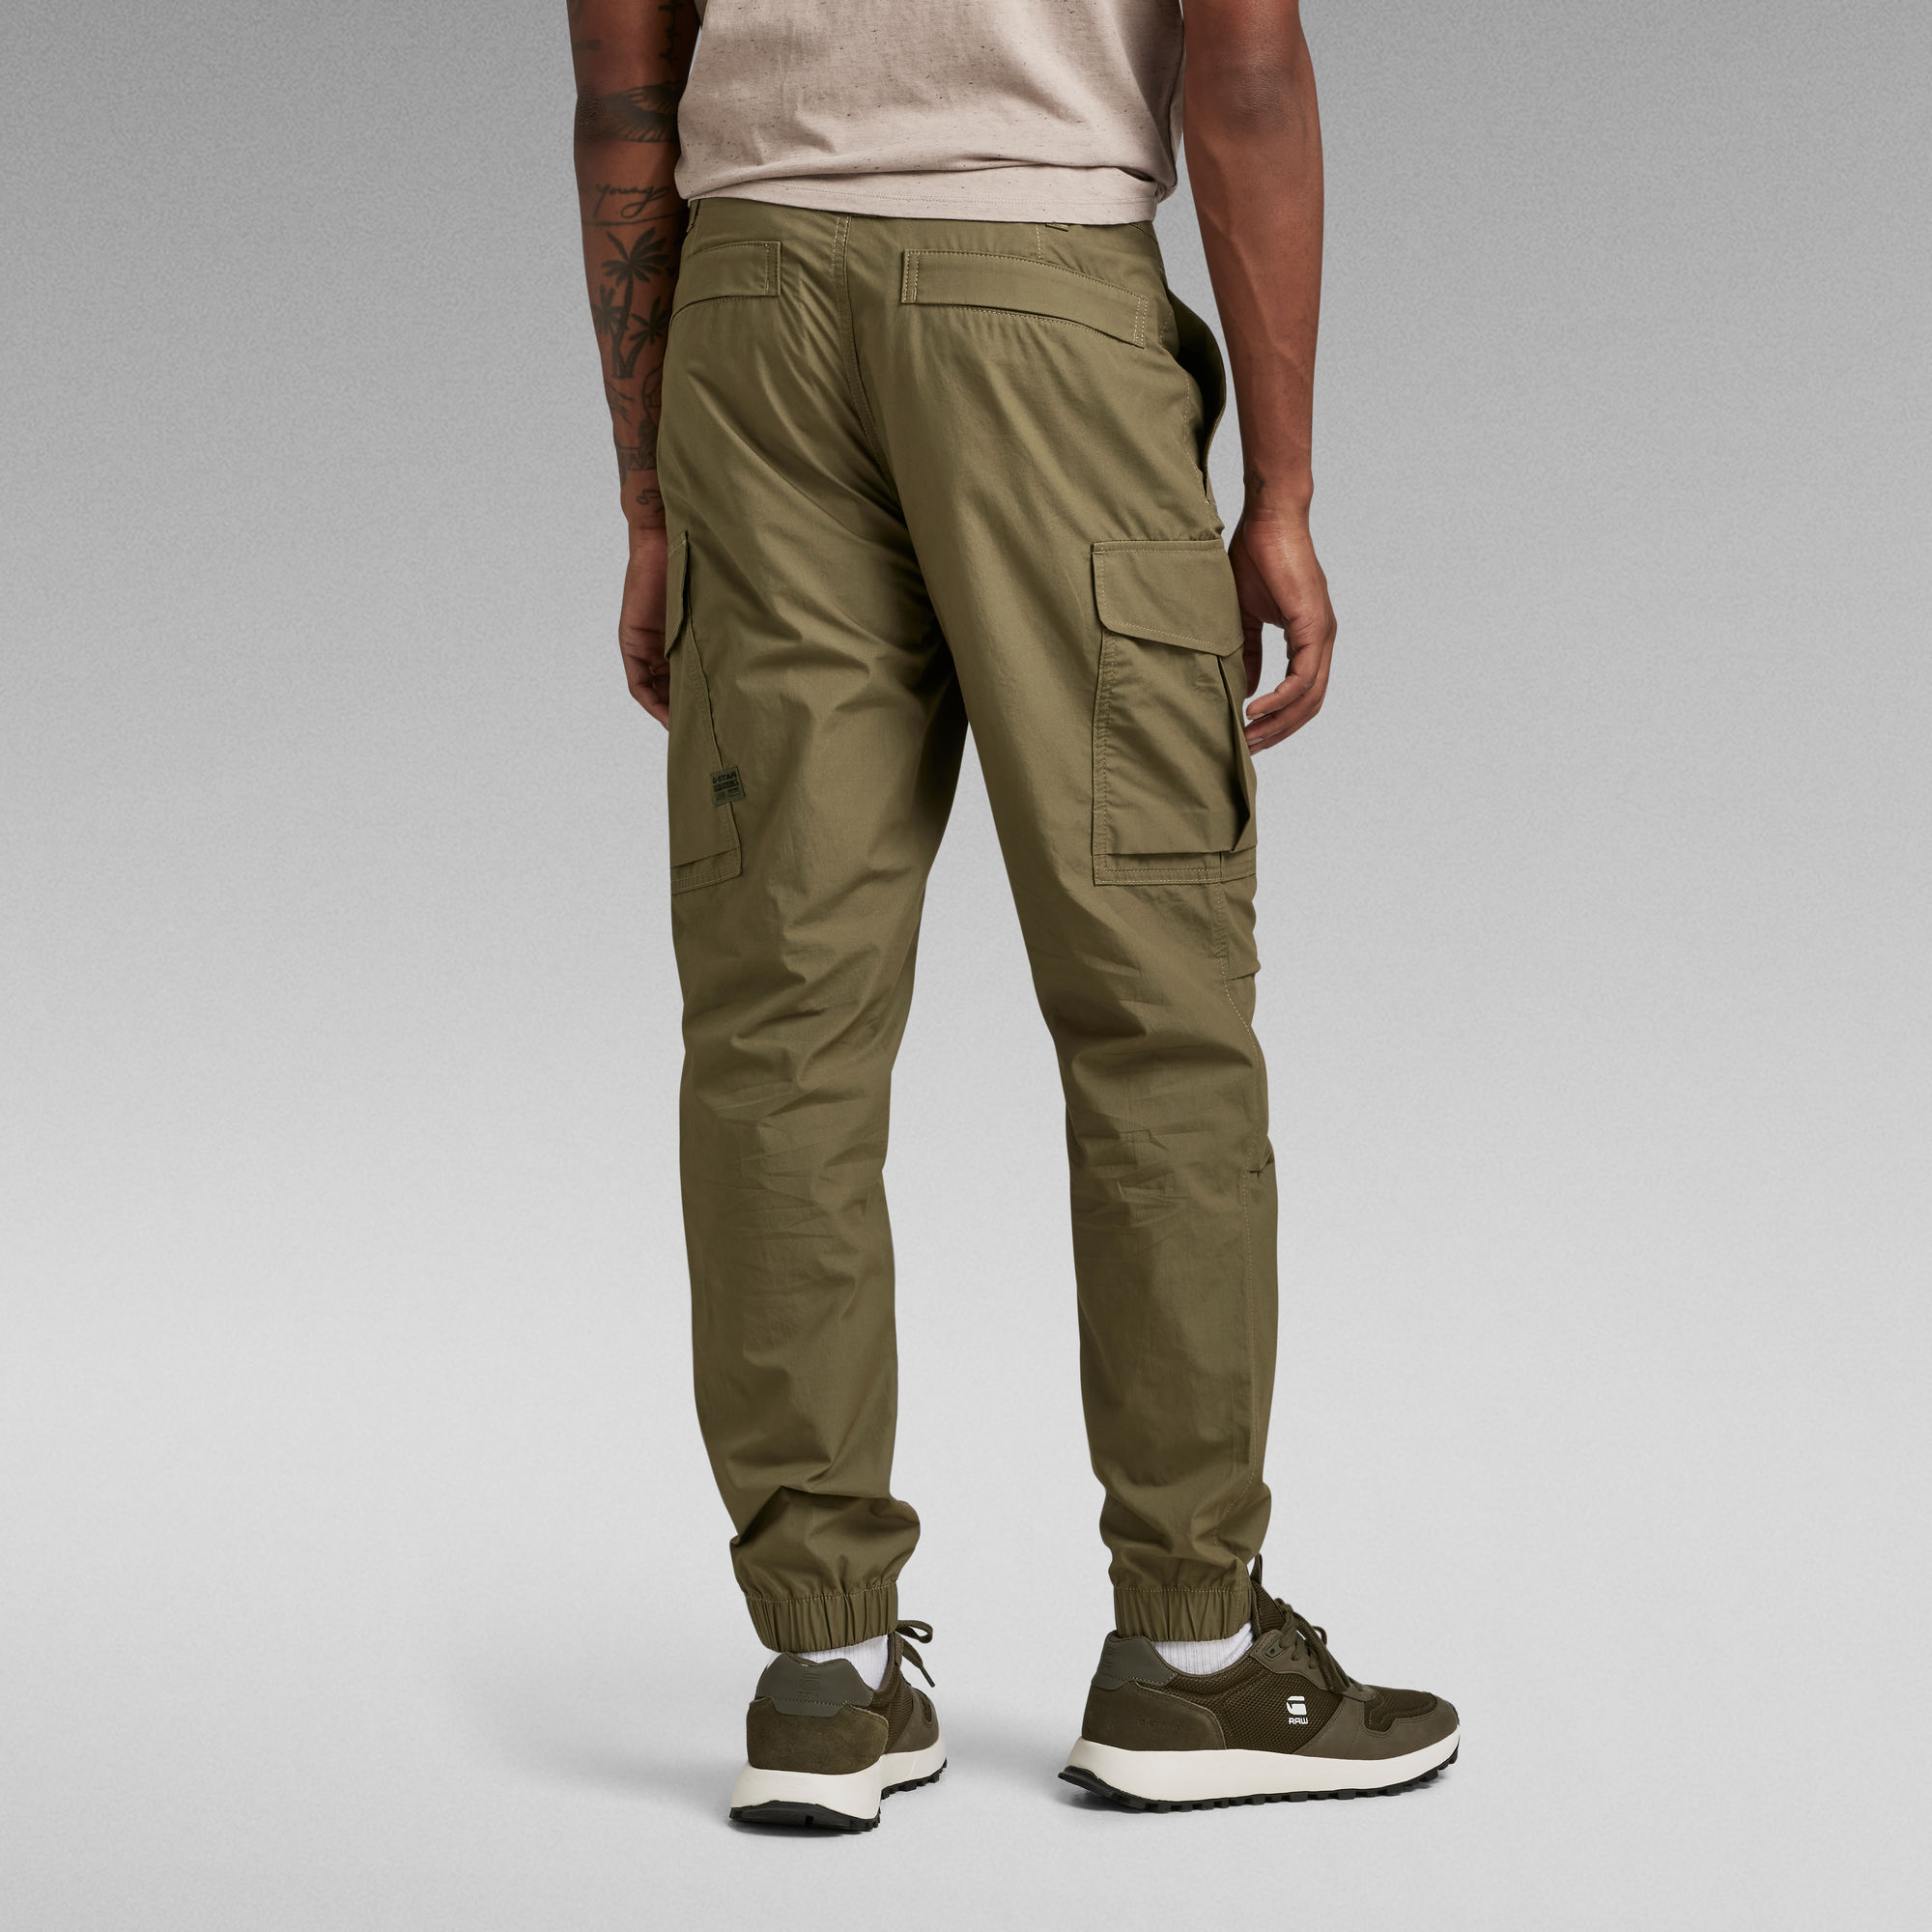 Vertx Airflow Phantom Ops Pant by Fighter Design: Combat/Tactical Pants  with Passive Cooling Mesh Technology (Video!) – DefenseReview.com (DR): An  online tactical technology and military defense technology magazine with  particular focus on